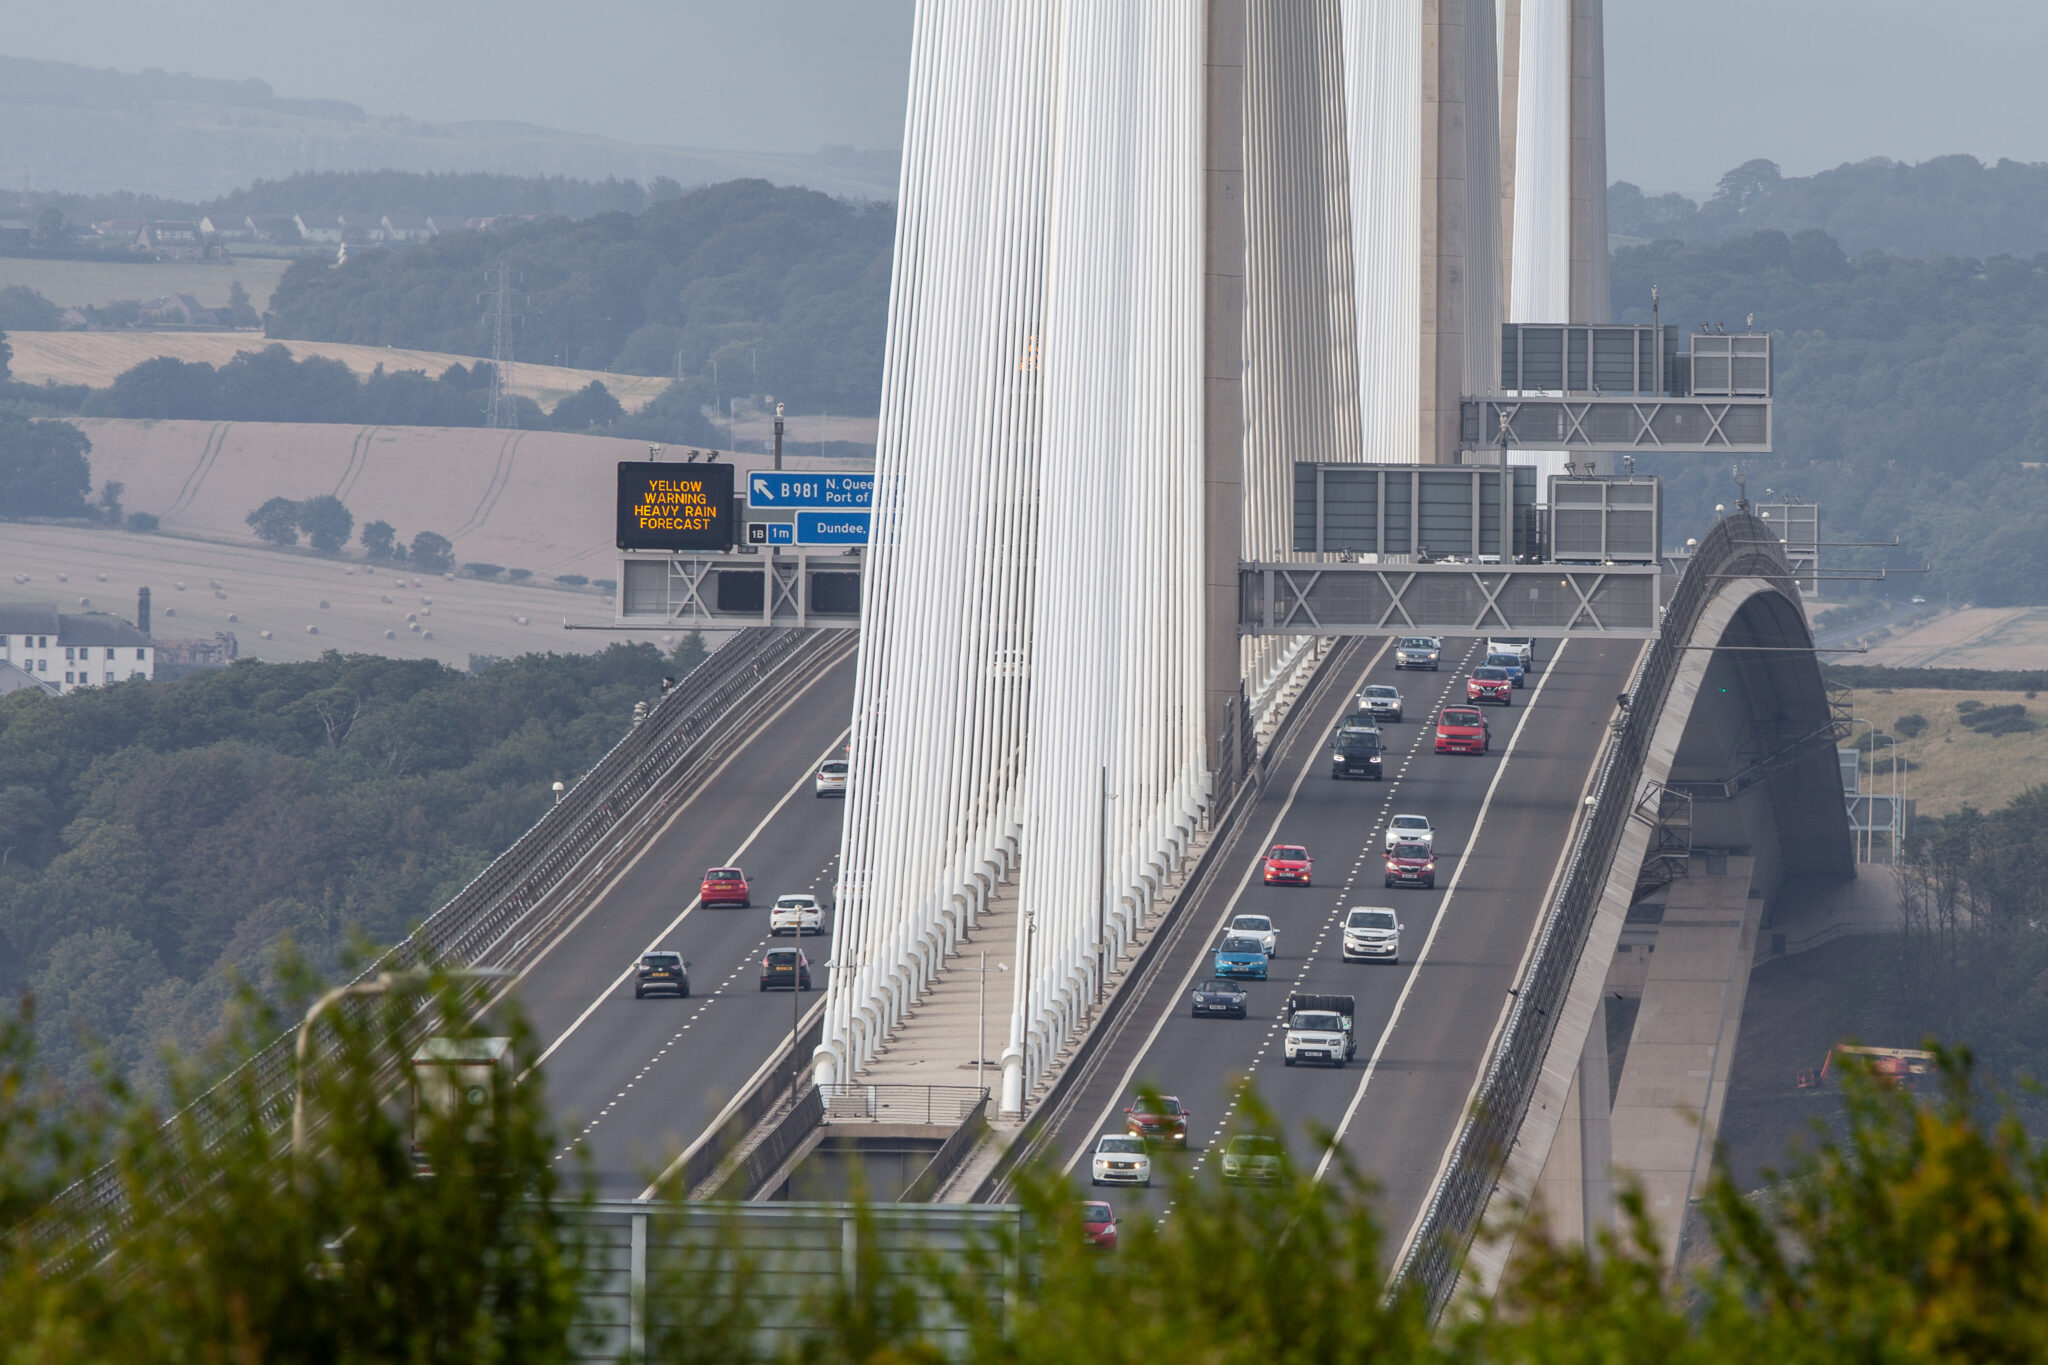 QUEENSFERRY CROSSING REOPENED TO TRAFFIC IN BOTH DIRECTIONS